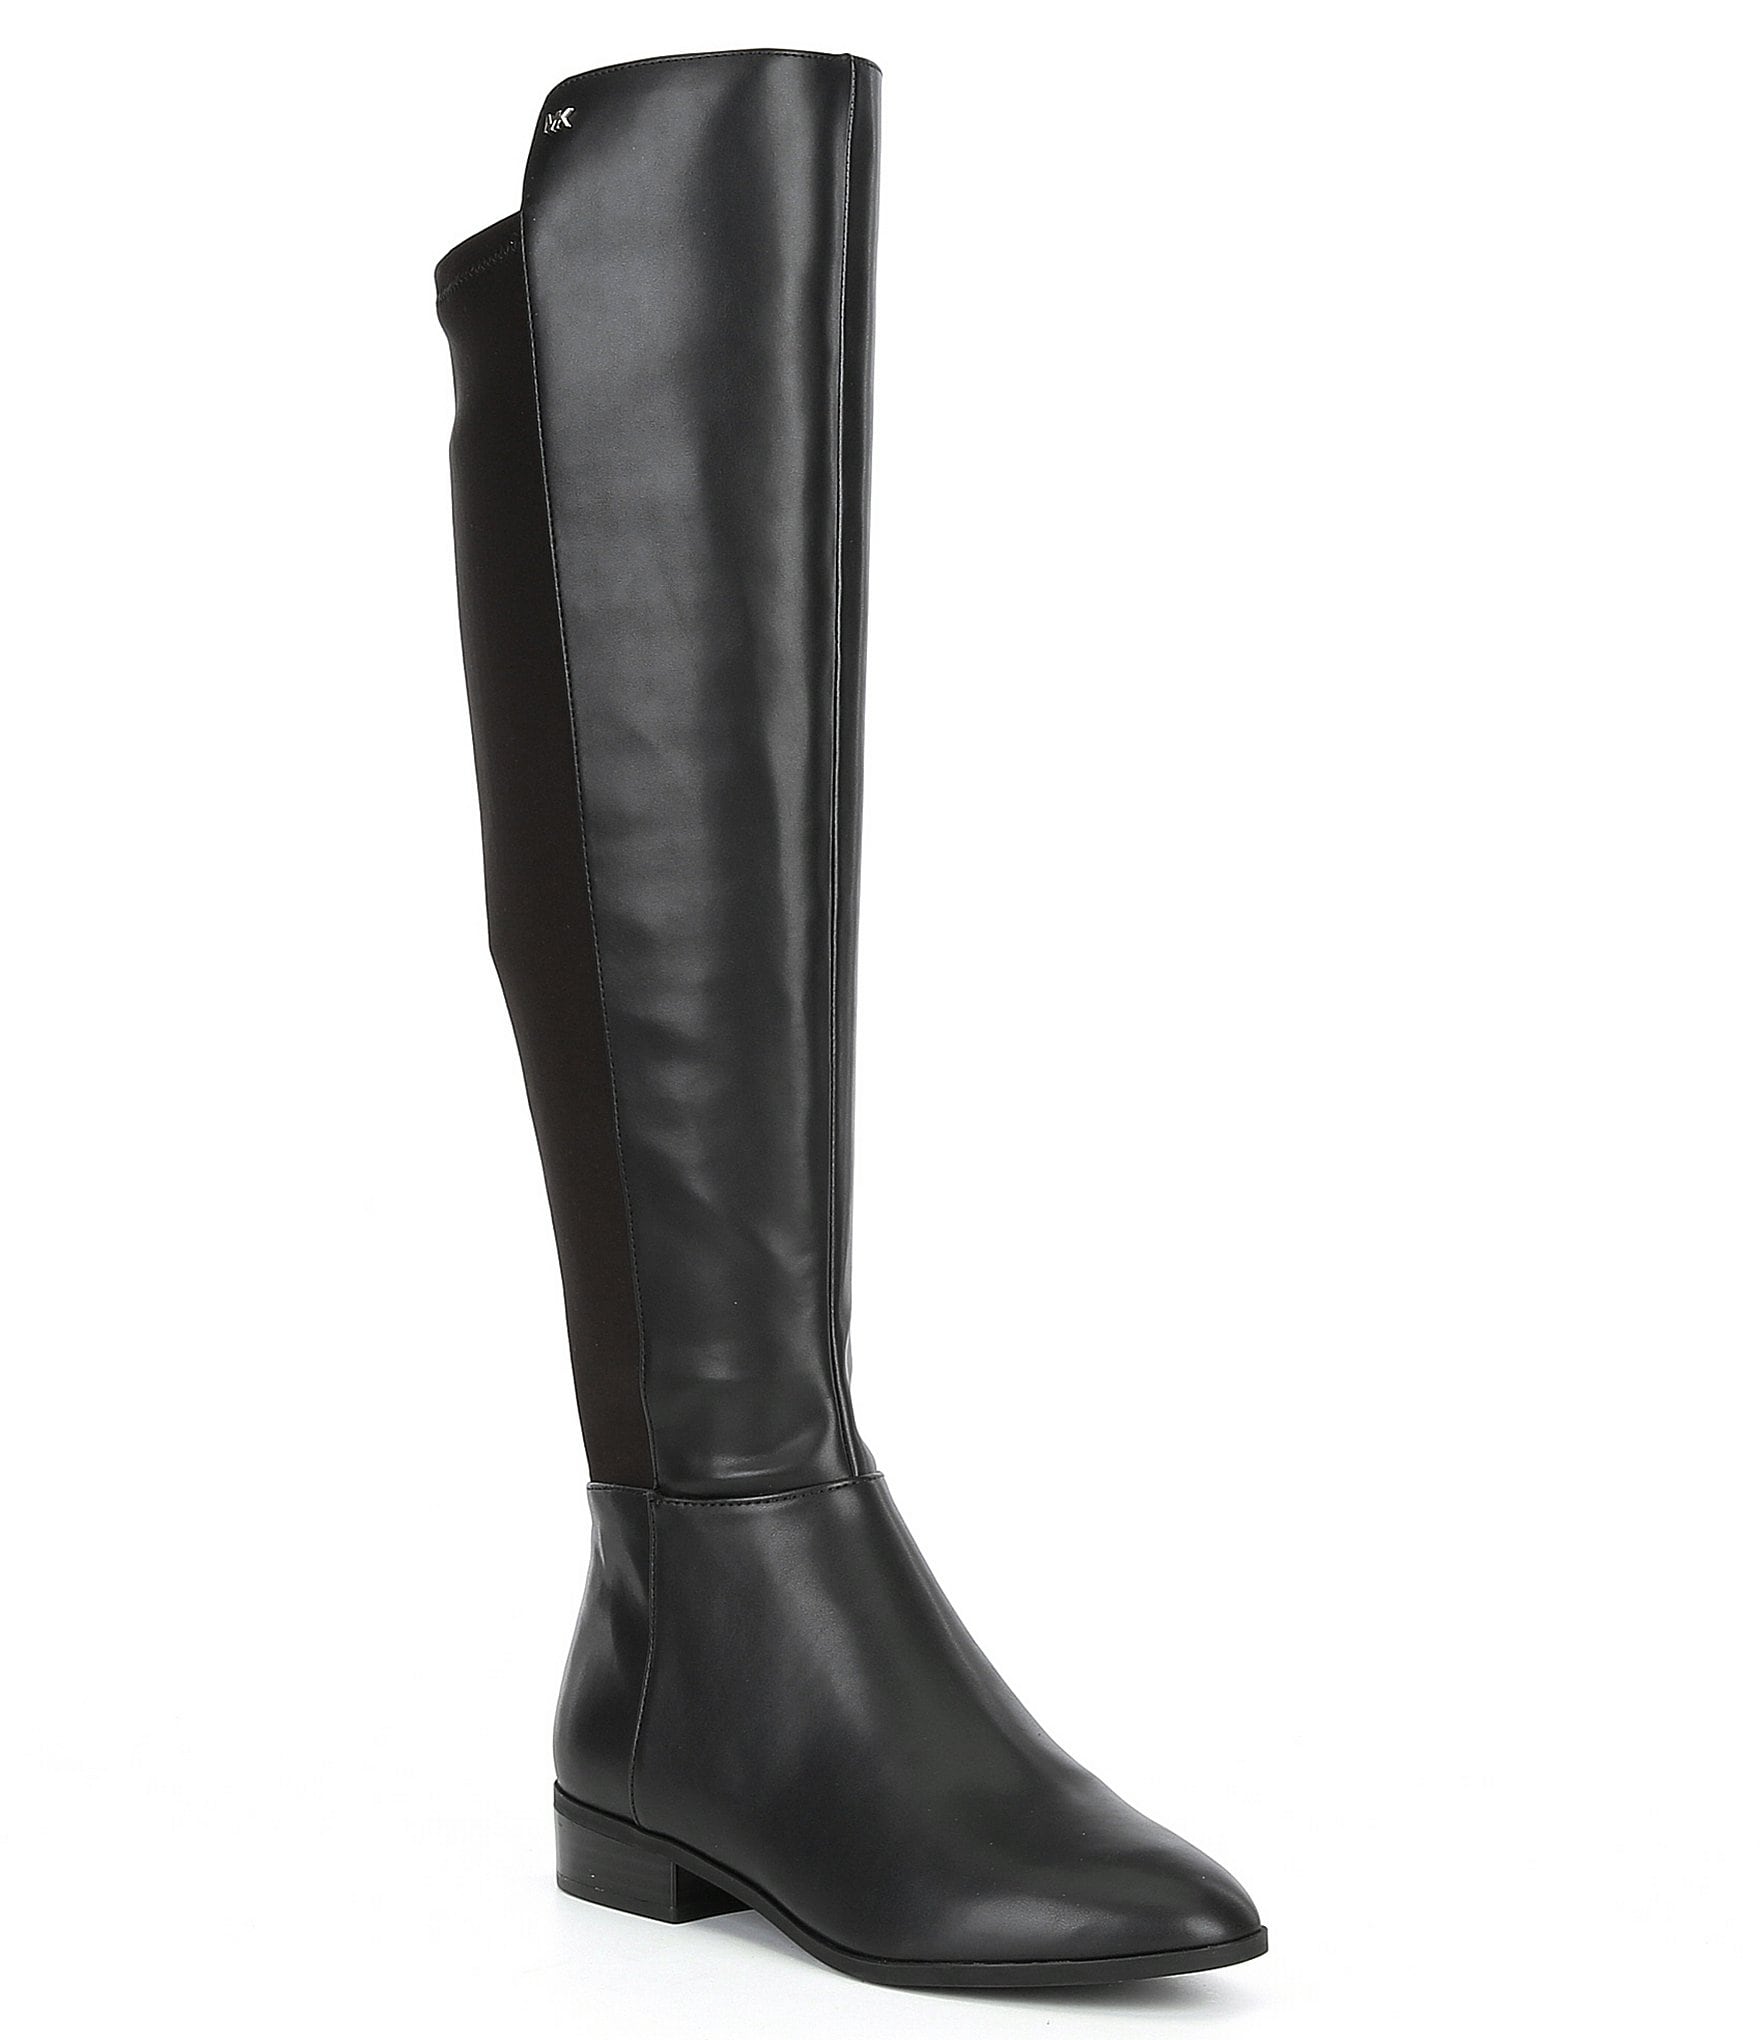 Eastern vidnesbyrd kort MICHAEL Michael Kors Bromley Faux Leather Over-the-Knee Boots | Dillard's